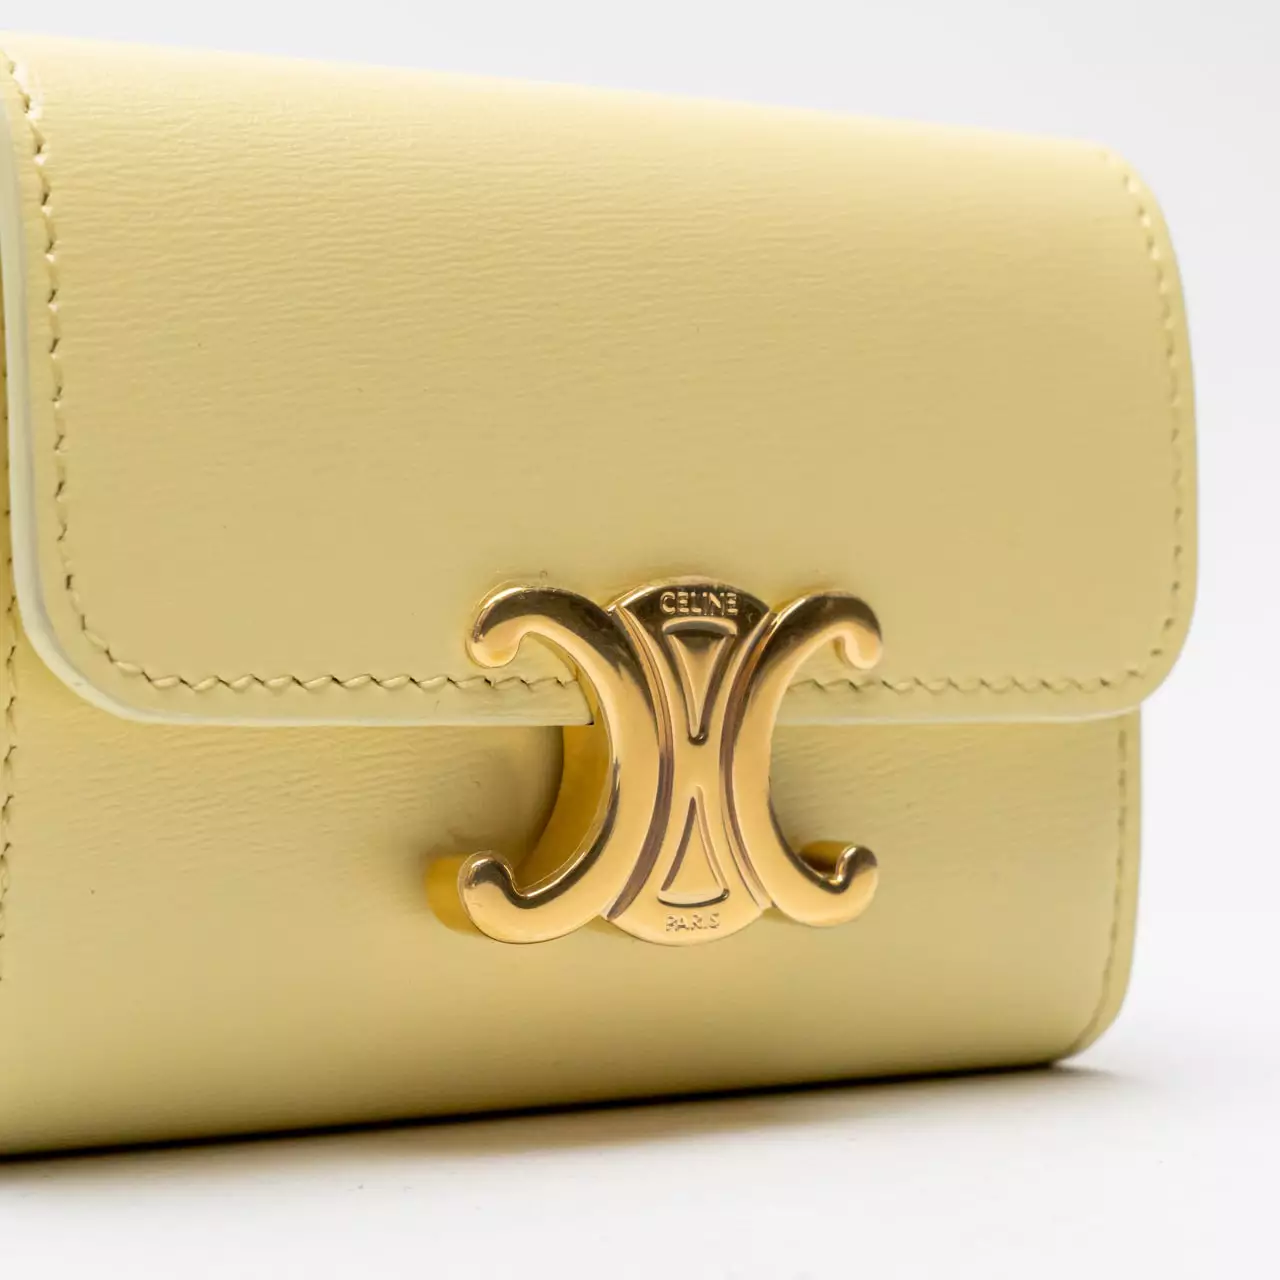 Celine - Compact Wallet with Coin Triomphe in Shiny Calfskin Leather - Yellow - for Women